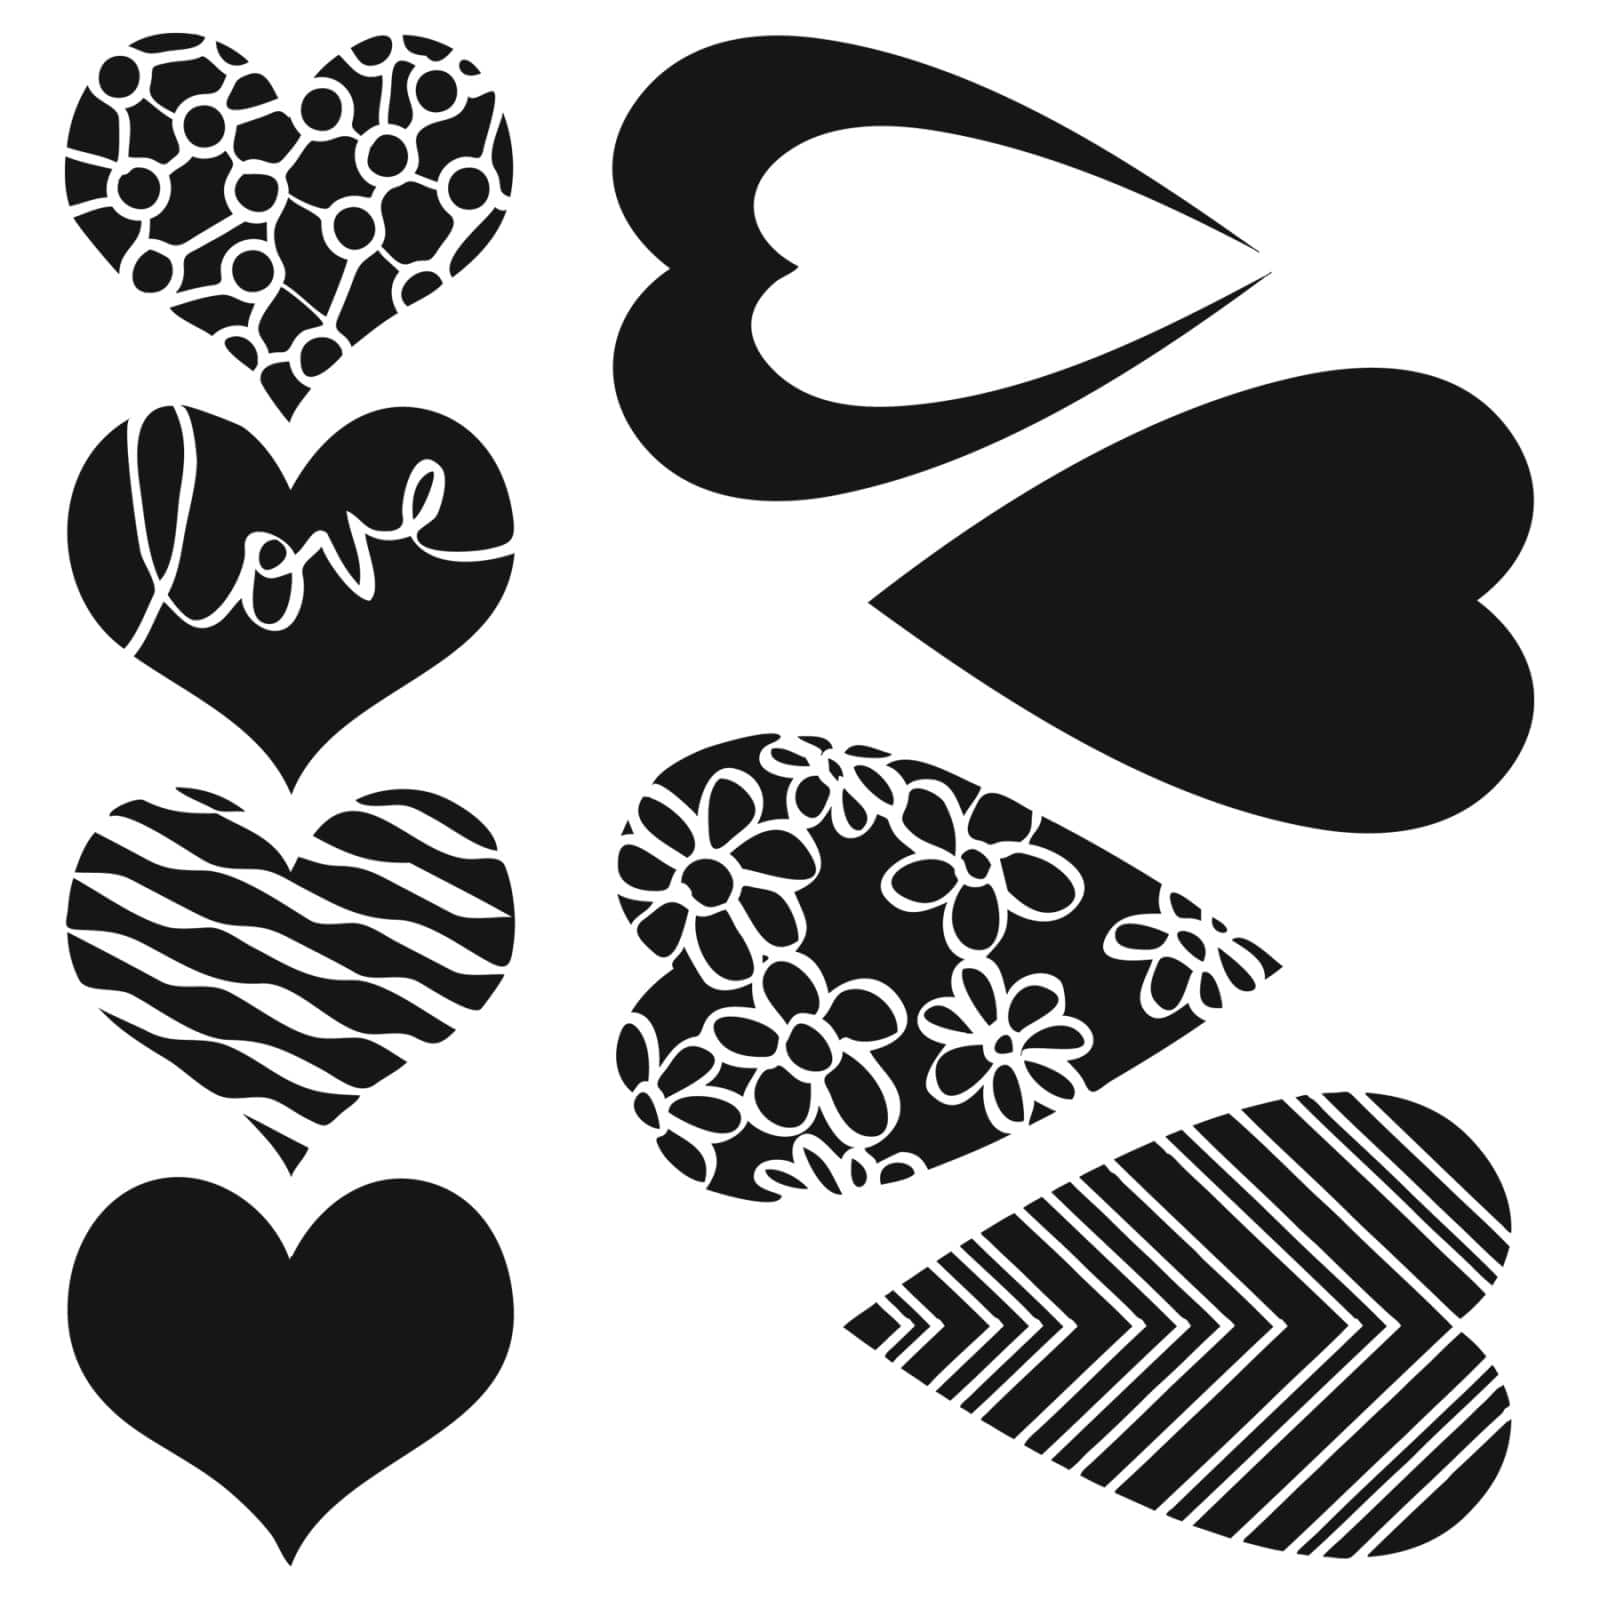  9 Pieces Valentine's Day Heart Stencils Reusable Love Heart  Stencil Template Plastic Heart Stencils for Painting on Wood Wall Canvas  Greeting Card Home Decor DIY Crafts : Arts, Crafts & Sewing